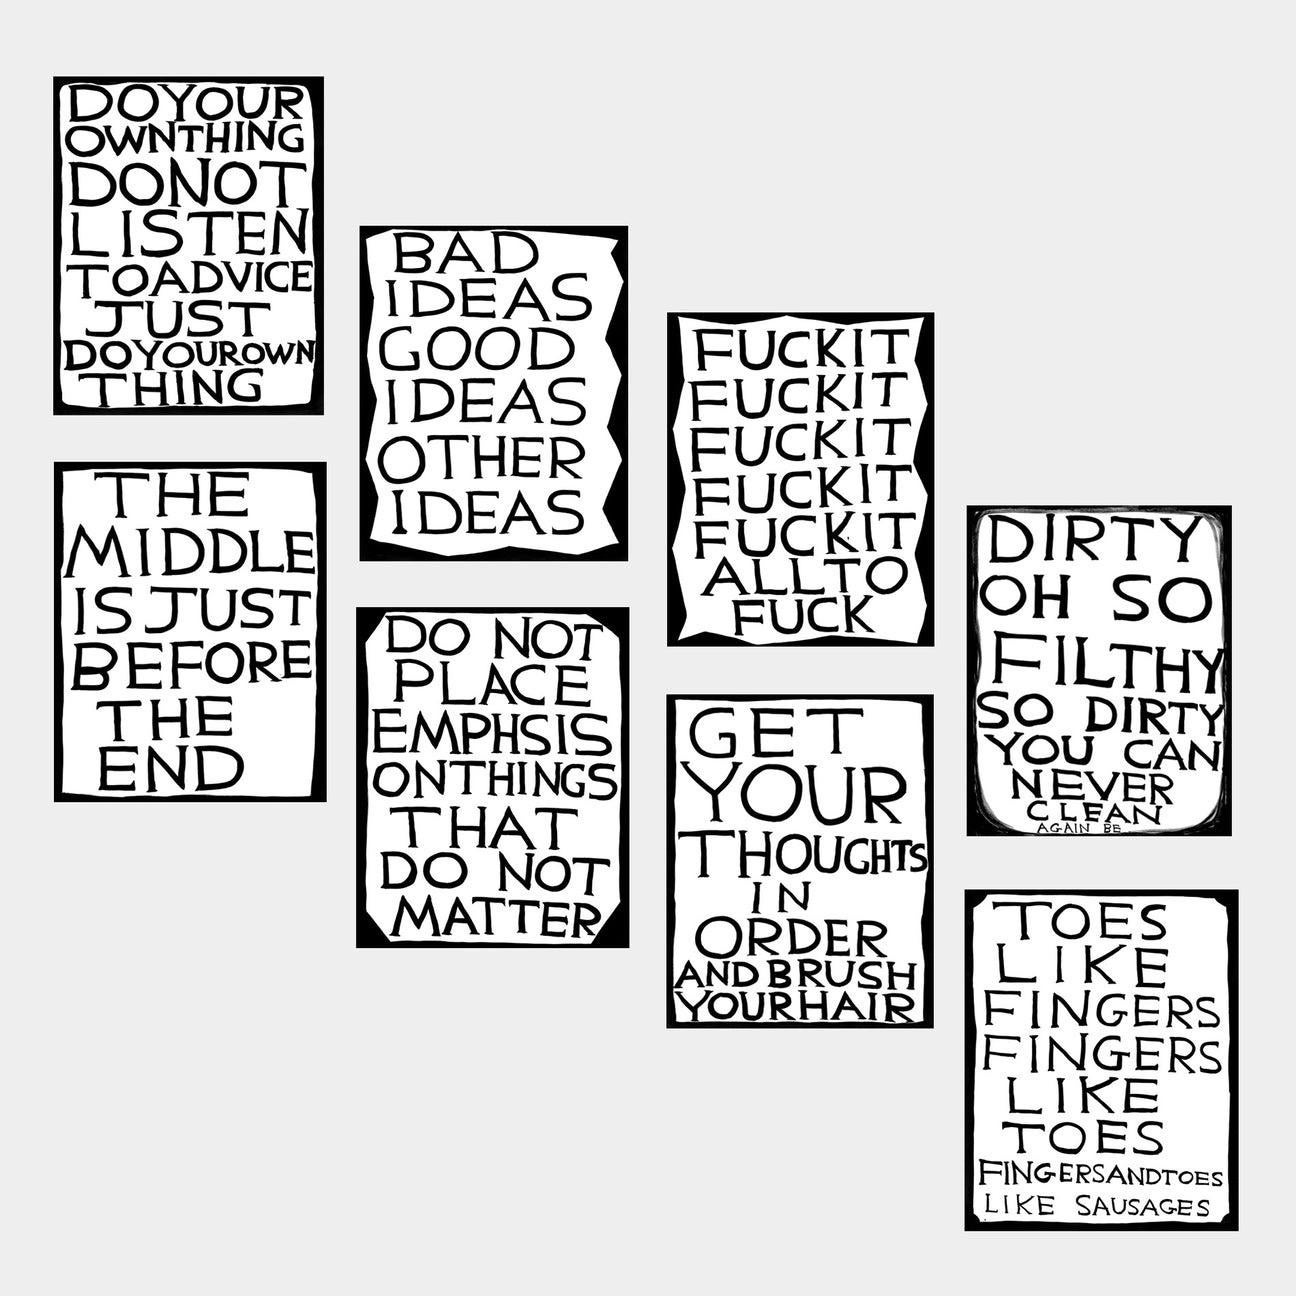 David Shrigley, Slogans To Live By, 2022

Full set of 8 prints 

Off-set lithograph
Open edition, unframed 
50 x 70 cm (19.68 x 27.55 in) 
Printed on 200g Munken Lynx paper Narayana Press in Denmark

This print is based on the original acrylic work